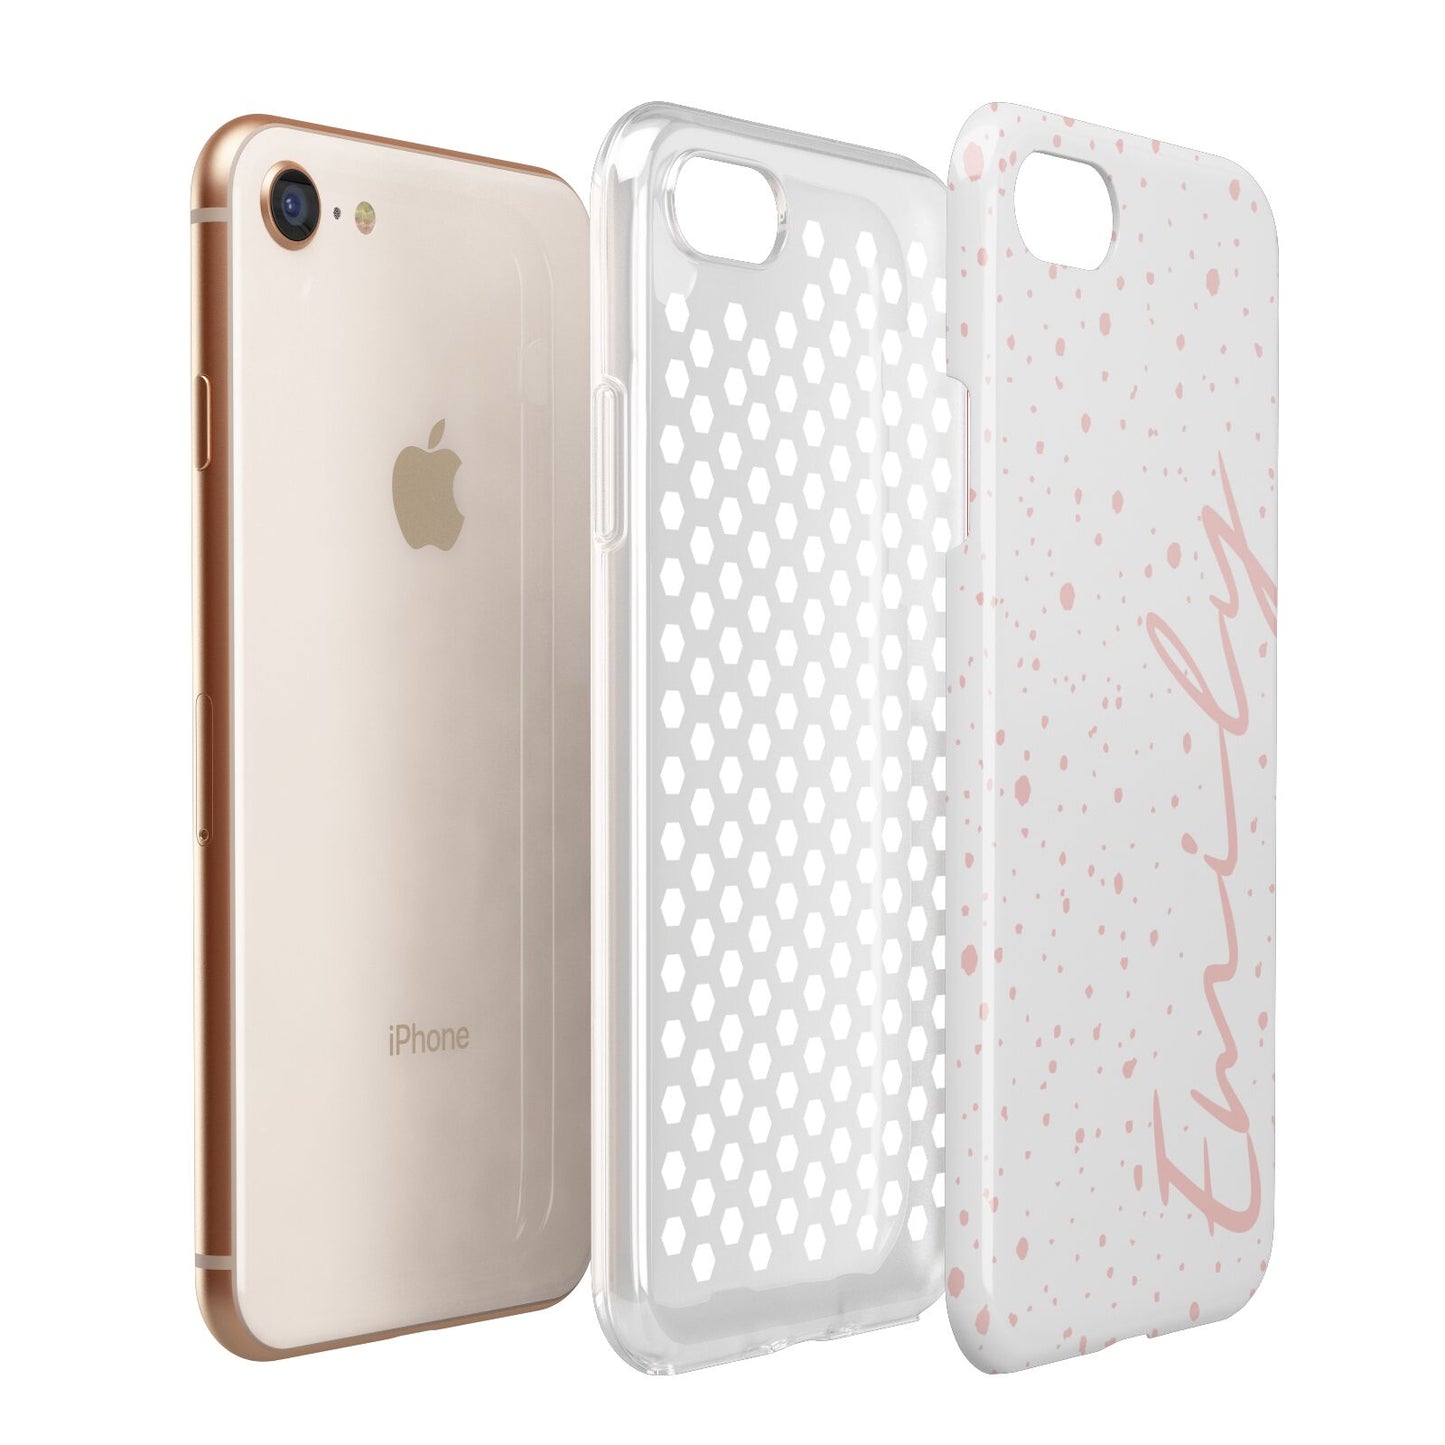 Custom Polka Dot Apple iPhone 7 8 3D Tough Case Expanded View